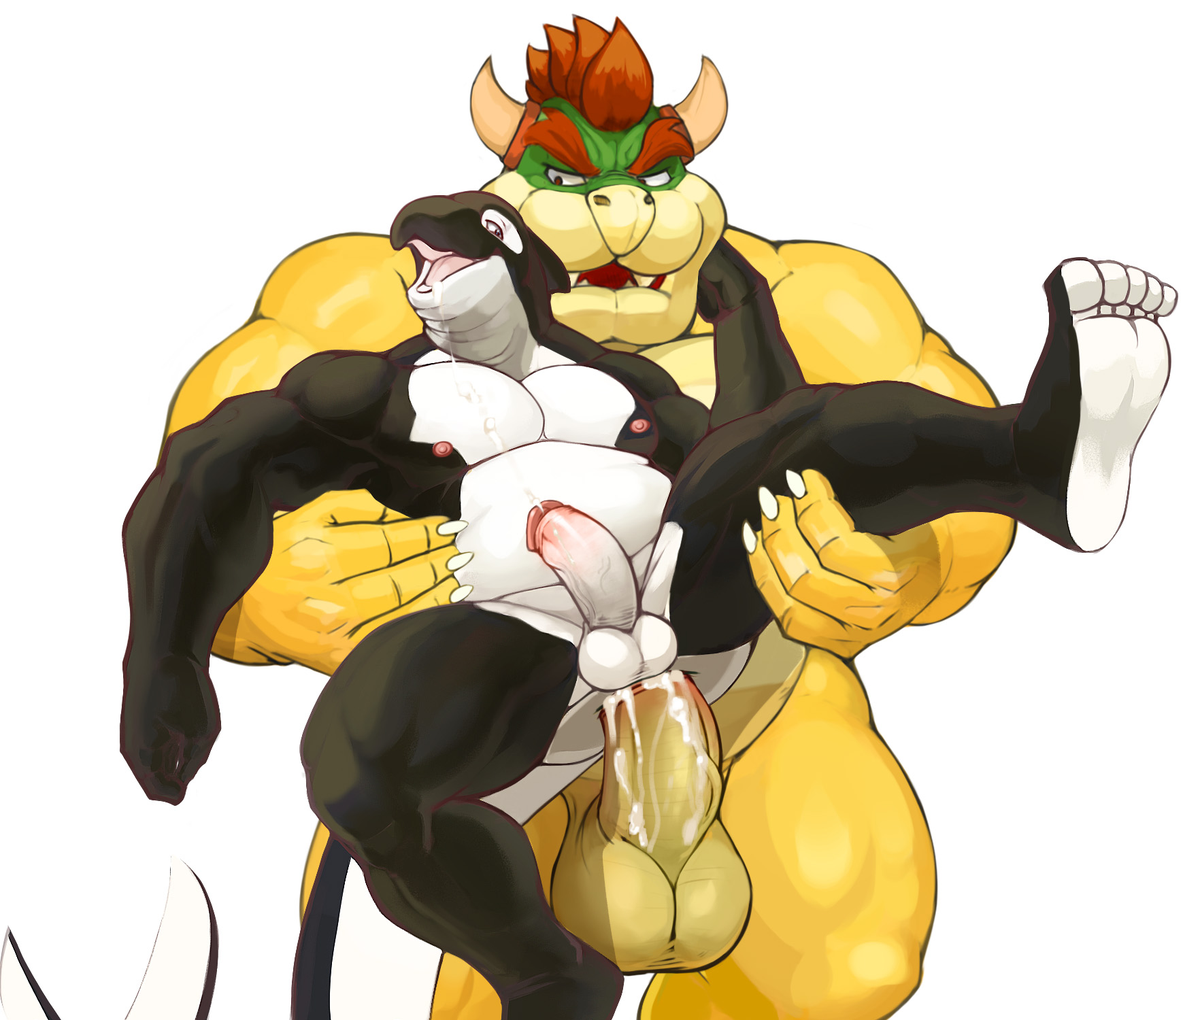 @thelenorca the winner of YCH with bowser